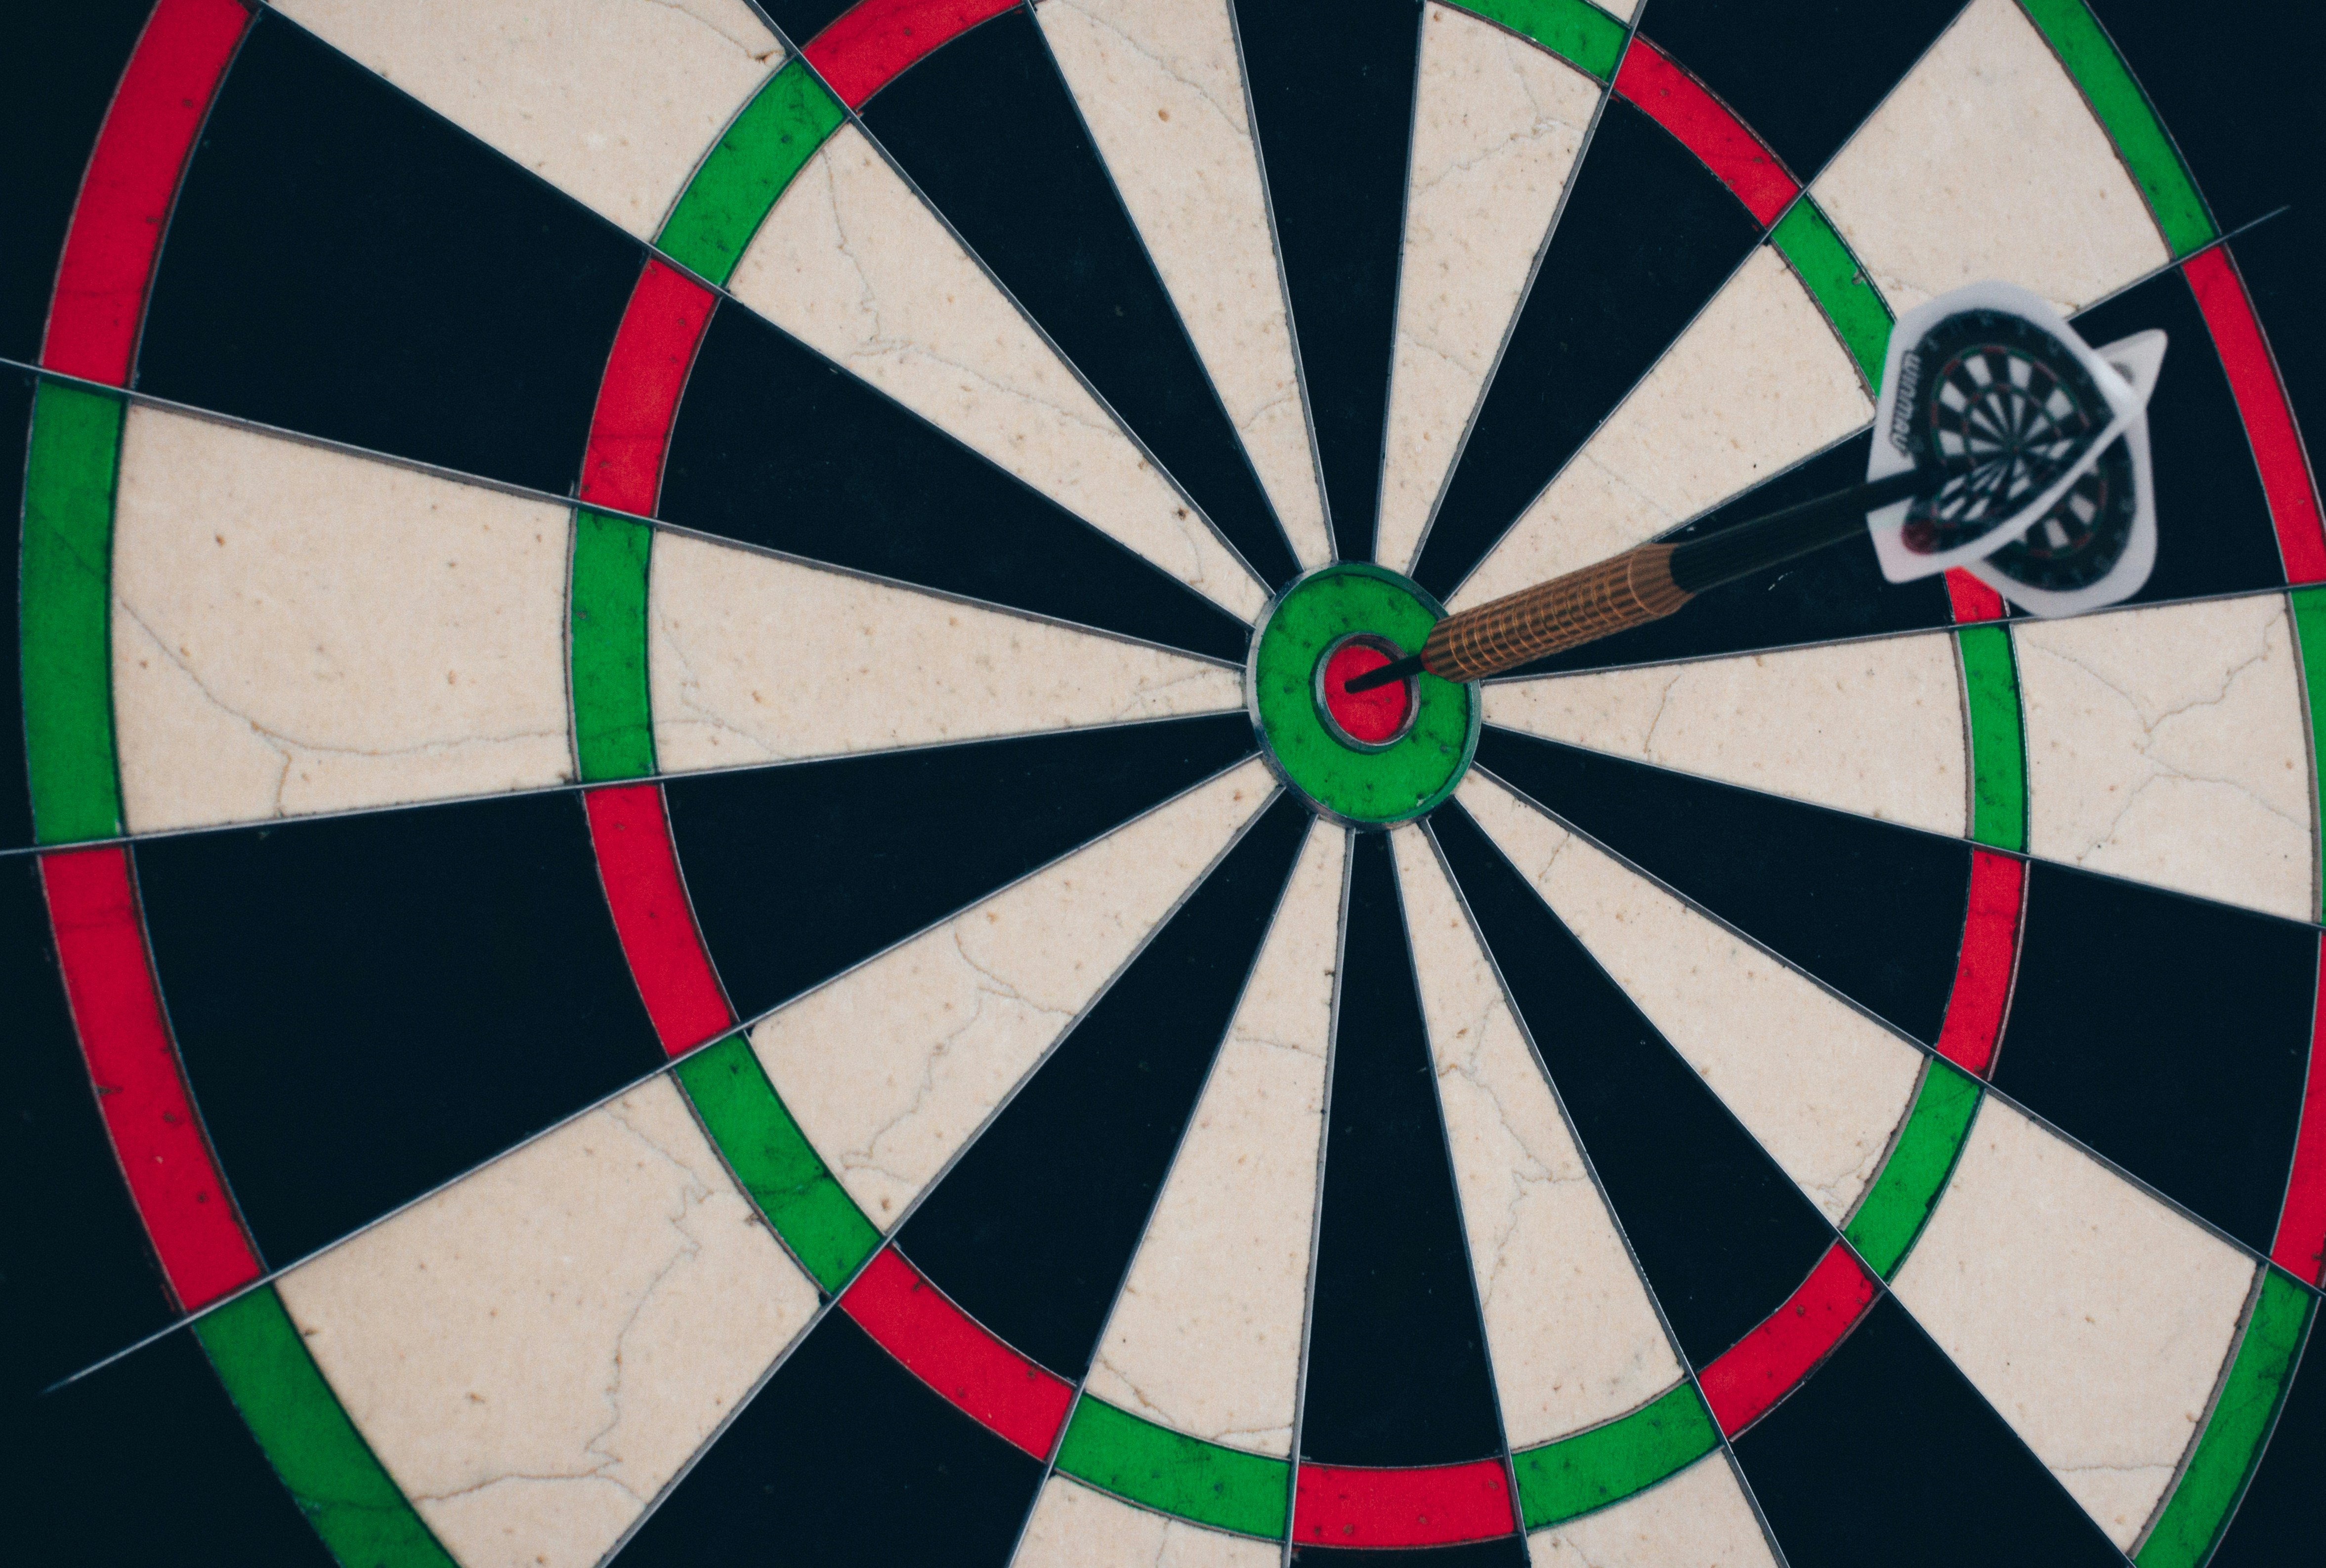 this image shows a dart with a bullseye pin to represent target